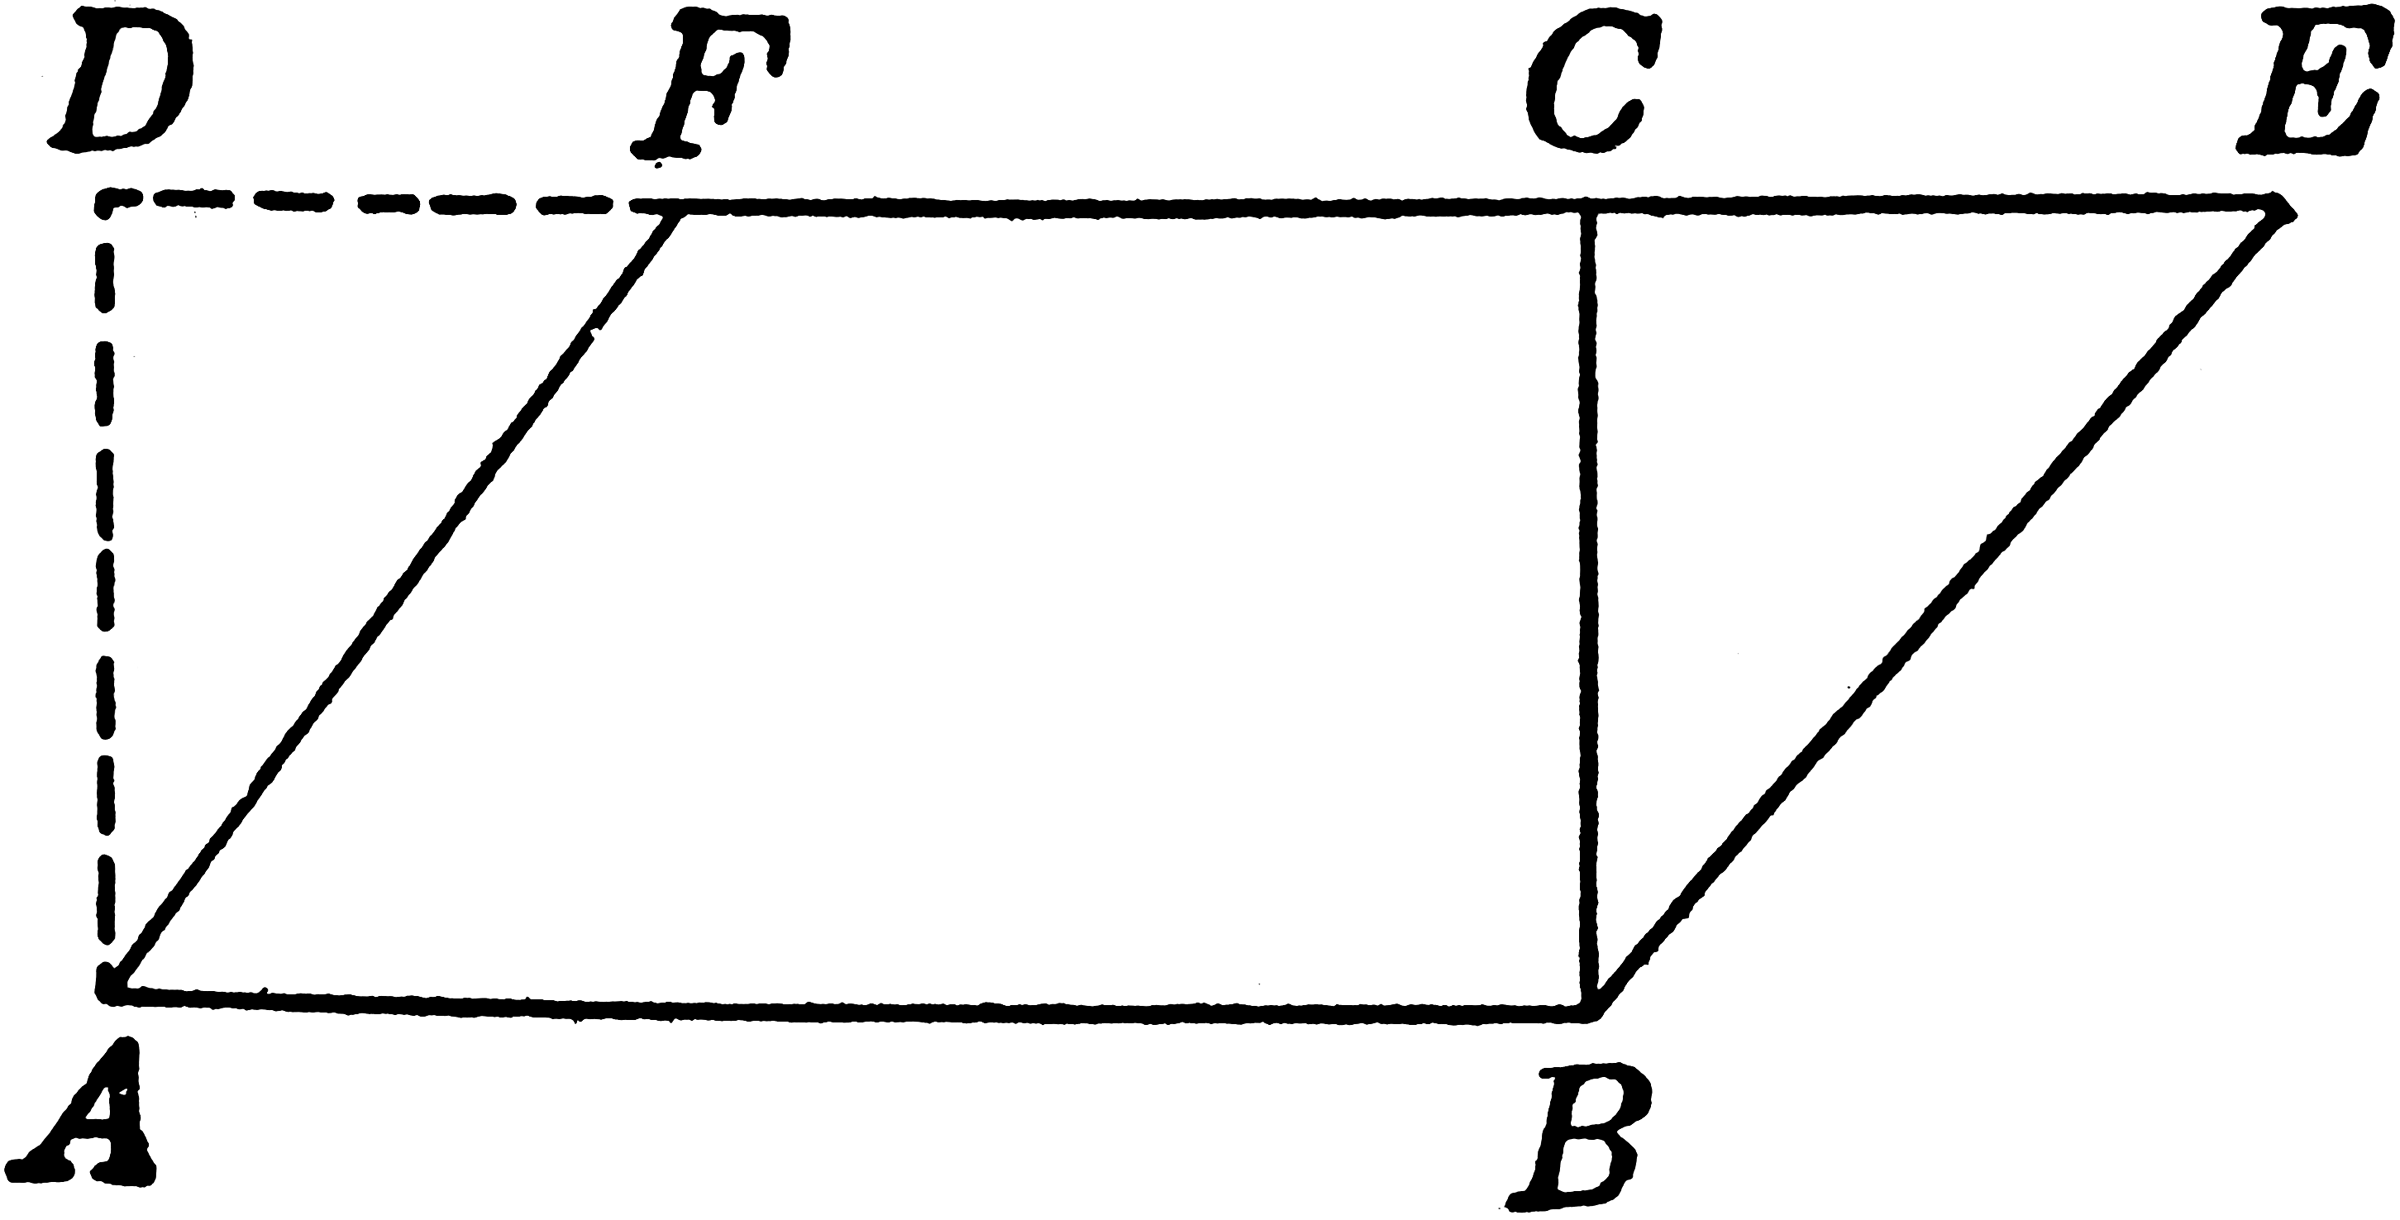 Parallelogram And Rectangle Relationship   Clipart Etc